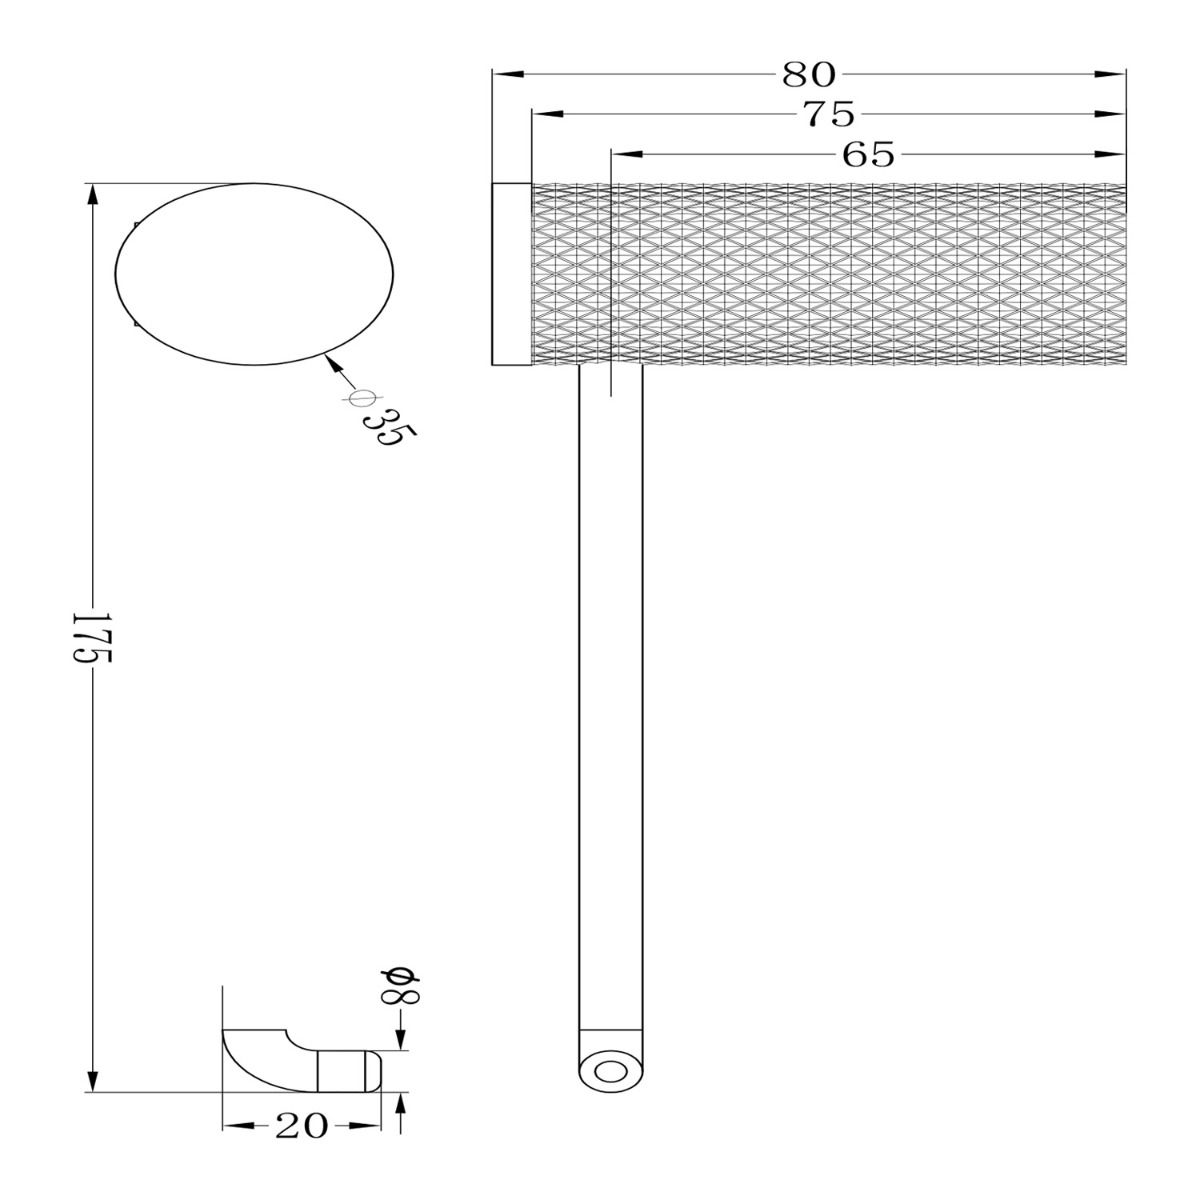 Rock Knurled Toilet Roll Holder dimensions